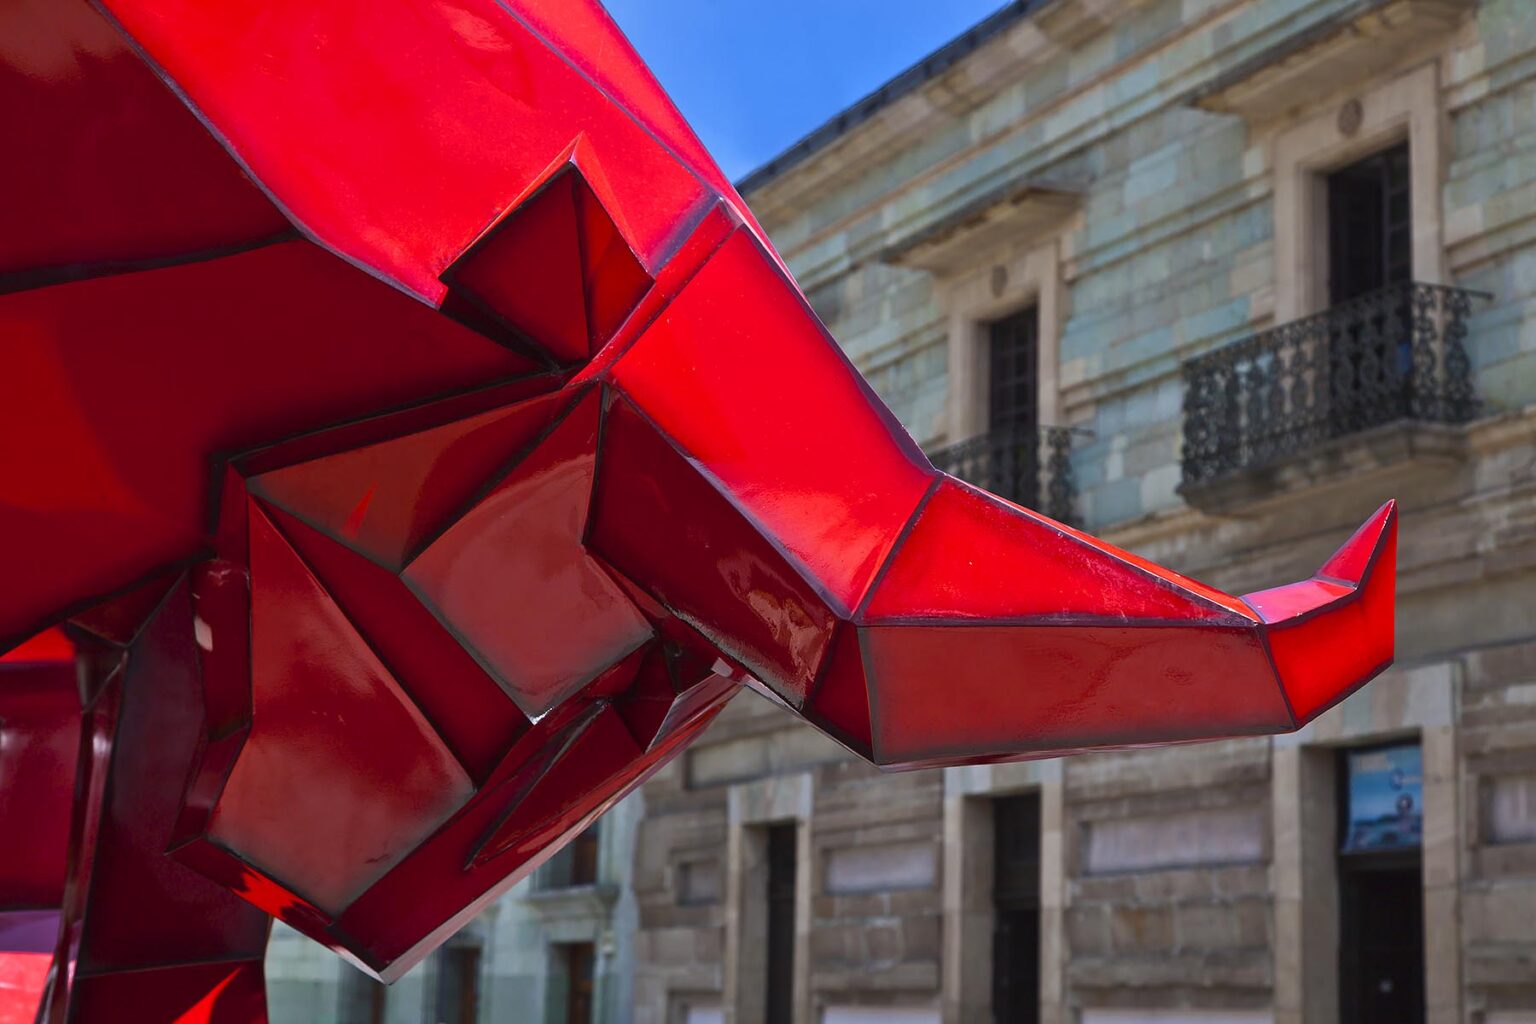 A RED BULL SCULPTURE by FERNANDO ANDRIACCI on display in front of the Oaxacan Catherdral - OAXACA, MEXICO